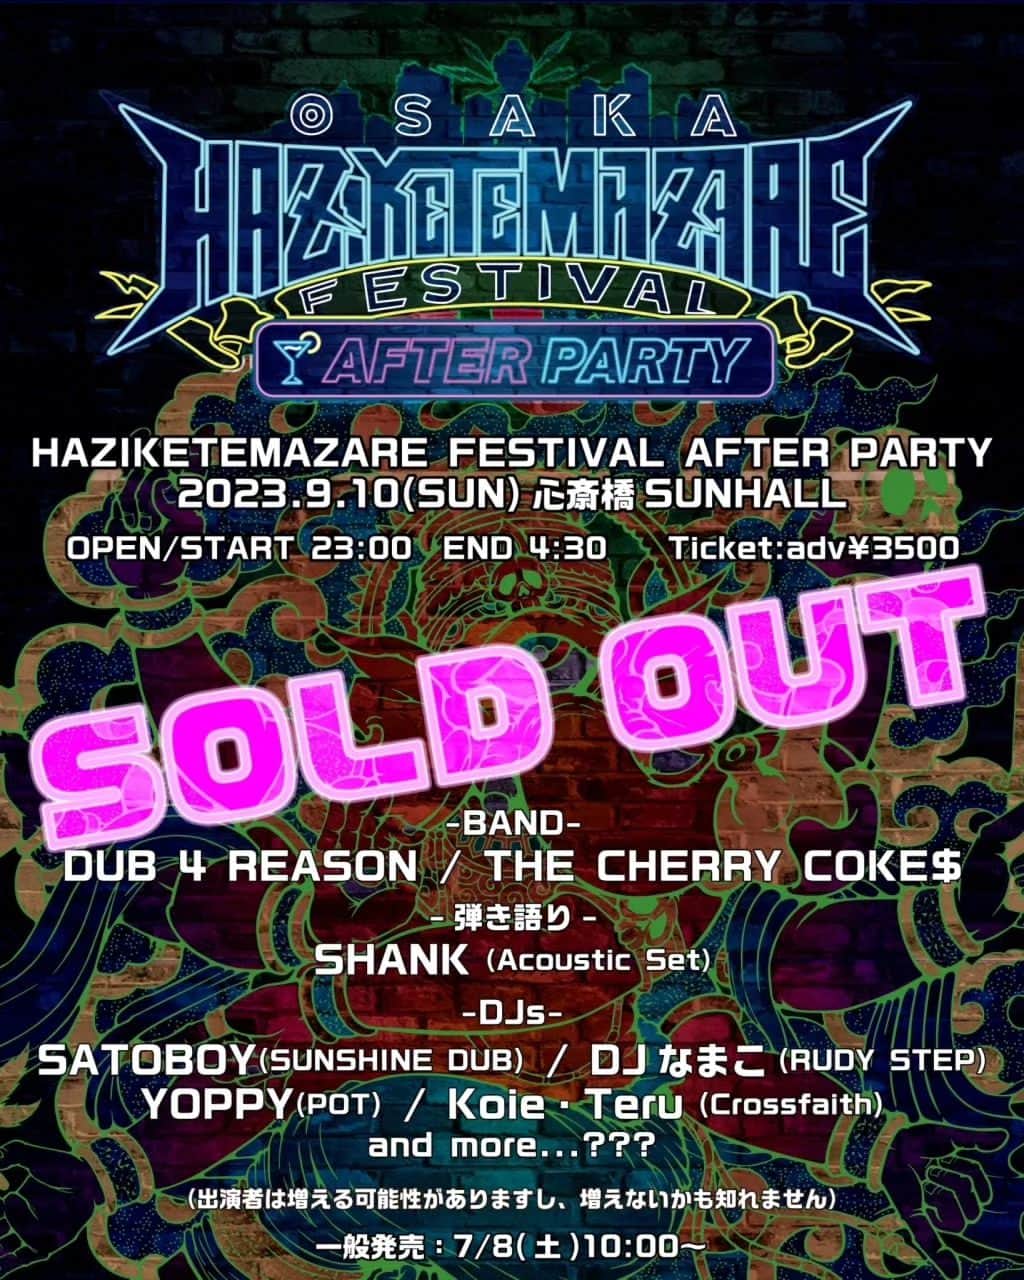 HEY-SMITHのインスタグラム：「【チケット情報】  “HAZIKETEMAZARE FESTIVAL AFTER PARTY” 9月10日(日) 心斎橋SUNHALL OPEN/START 23:00   チケットSOLD OUTしました！！ 朝までハジマザ！！  特設サイト http://haziketemazare.com/2023/」